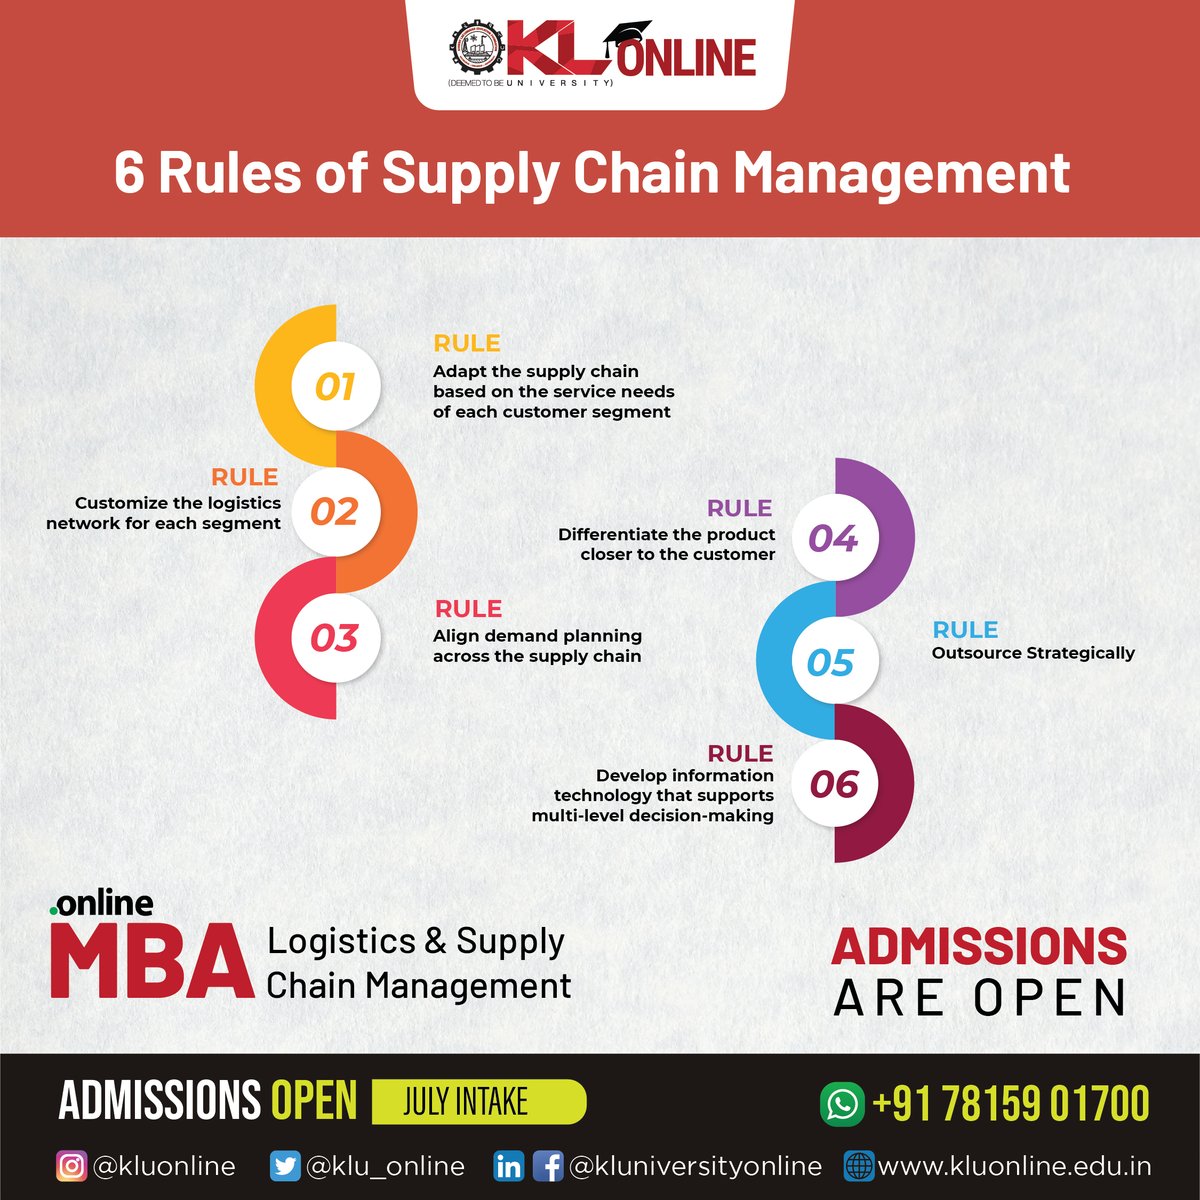 Logistics and Supply Chain Management is one of the most ancient and evergreen professions. Acquire all the necessary knowledge and skills from one of the pioneers in education to rule the roost.

Admissions are Open

#KLOnline #ThinkOnlineThinkKL #Onlinedegree #onlinelearning